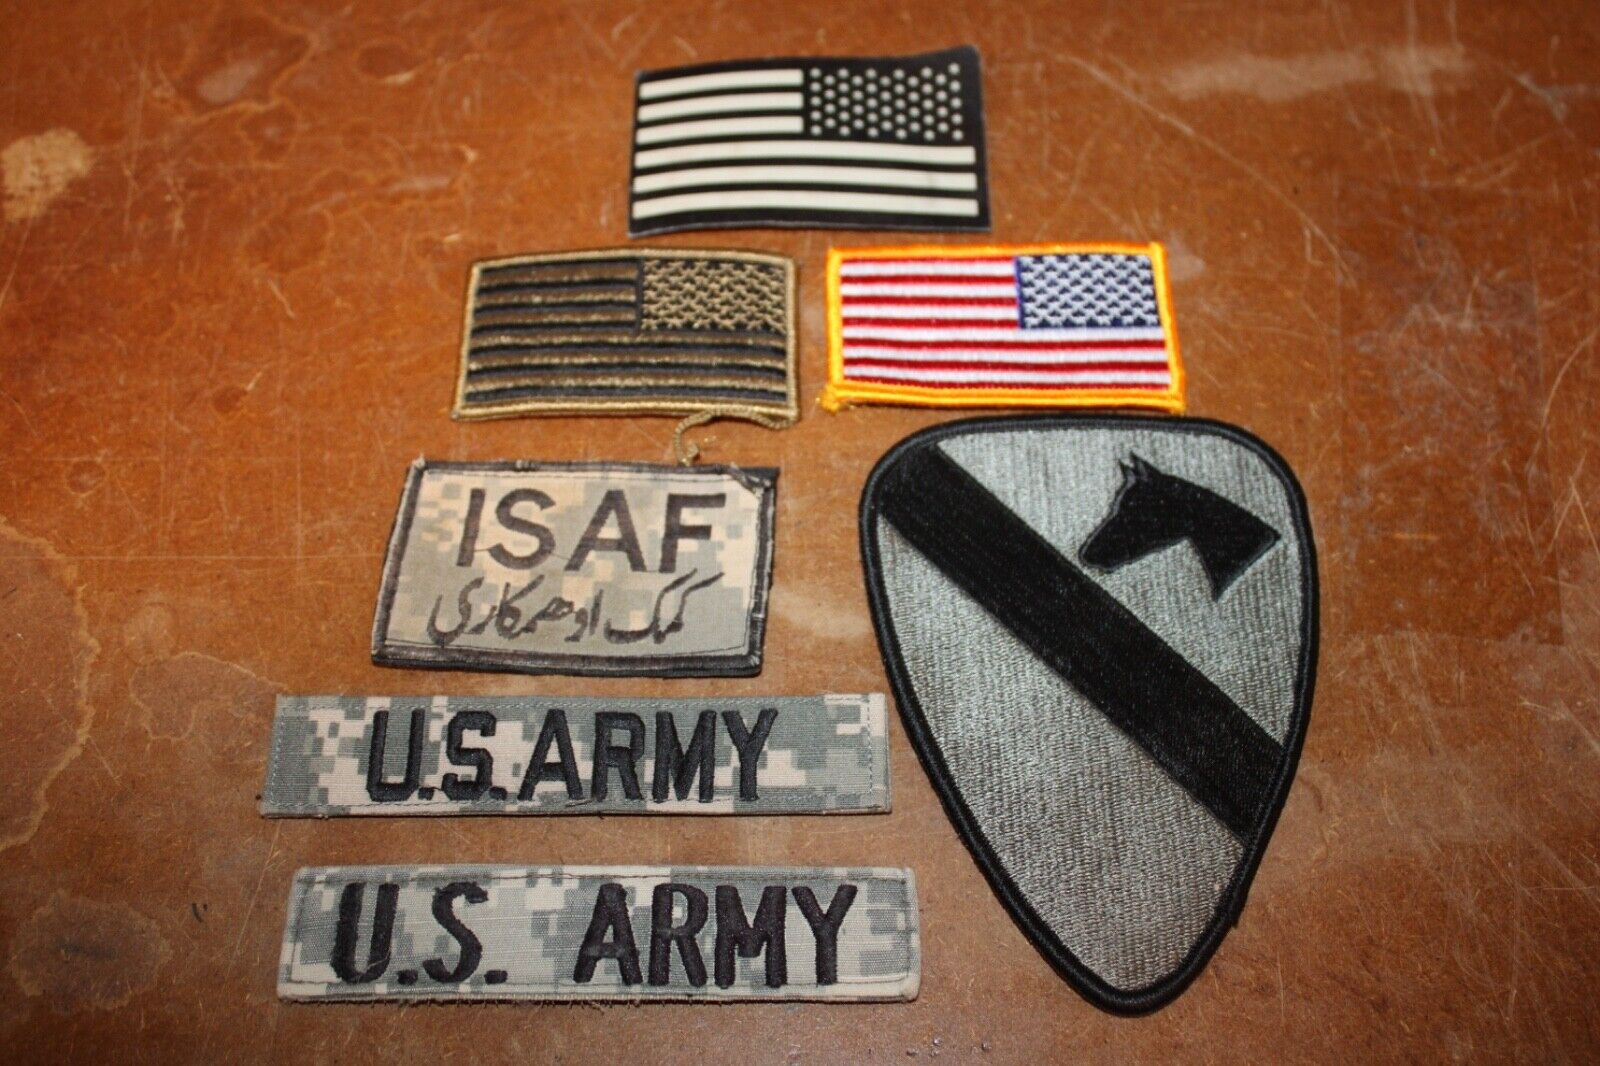 Lot of 1st Cavalry Division Military Veteran Patches 1CAV ISAF US Army